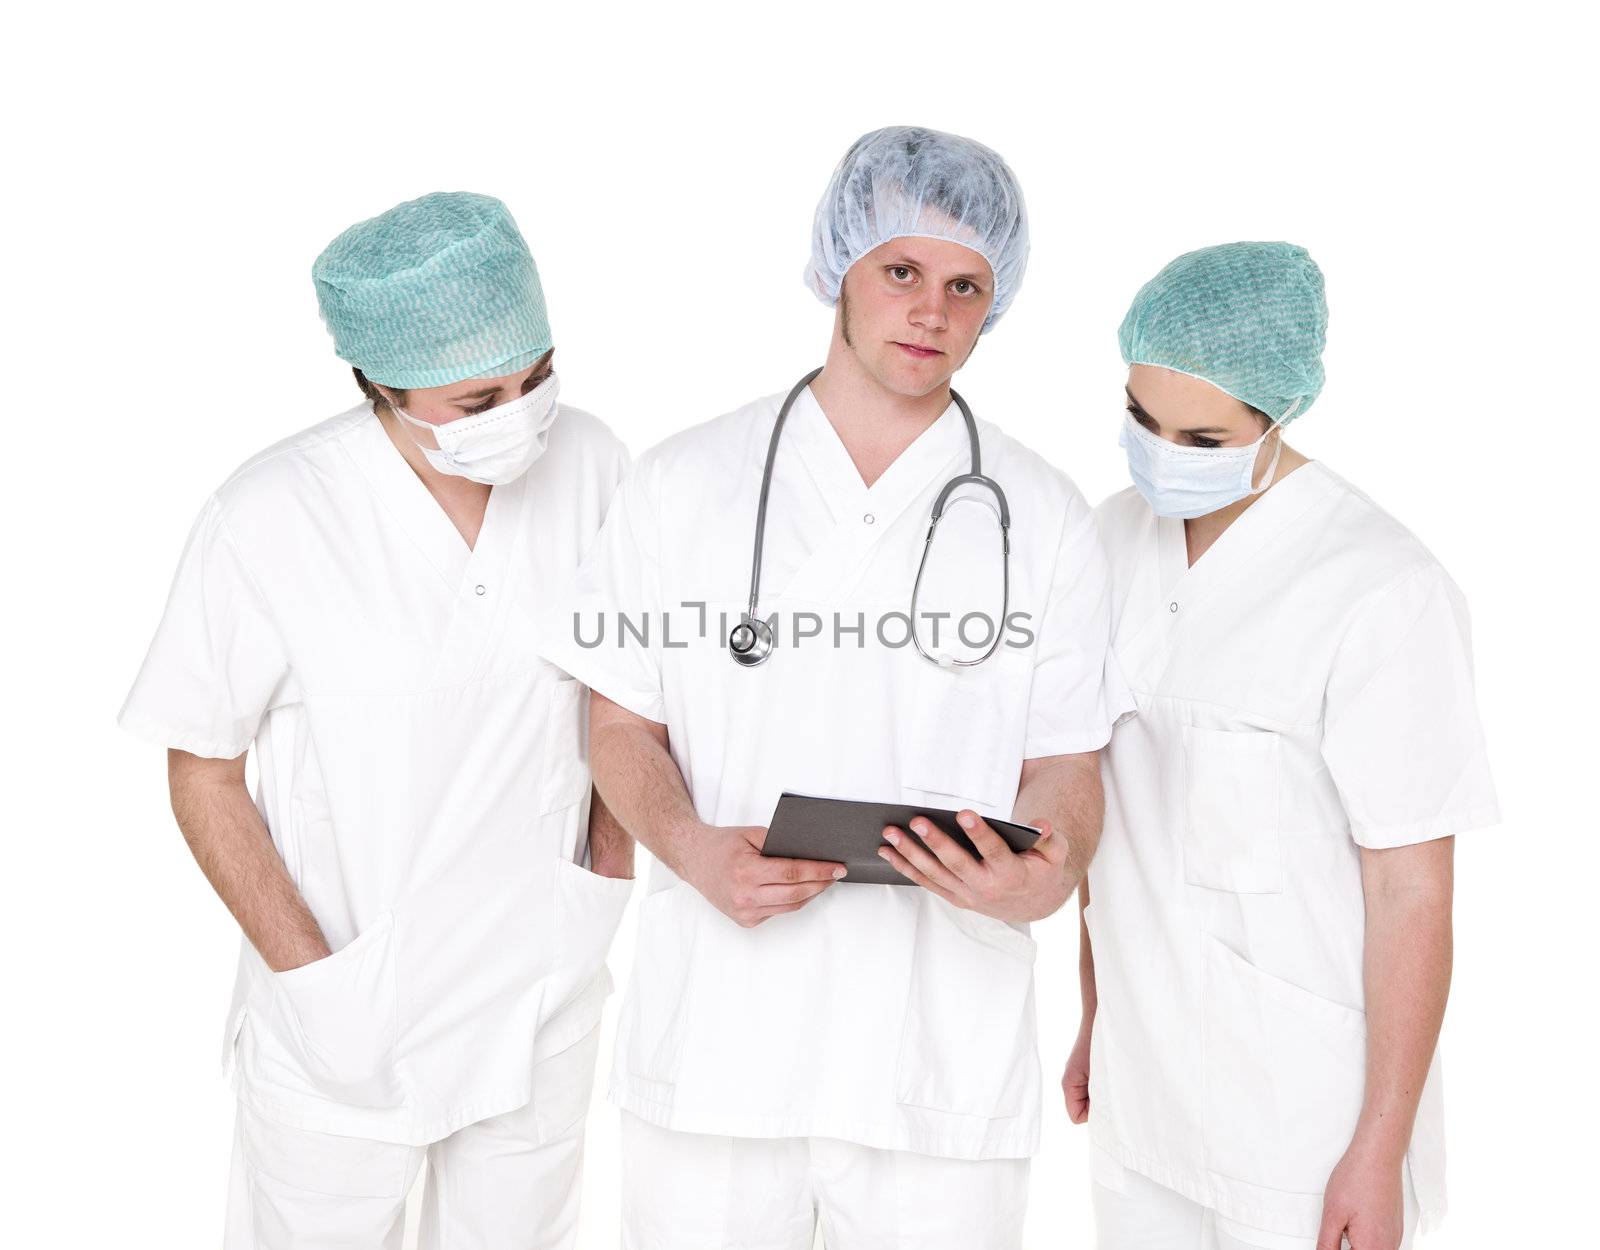 Doctor and Nurses isolated on white background